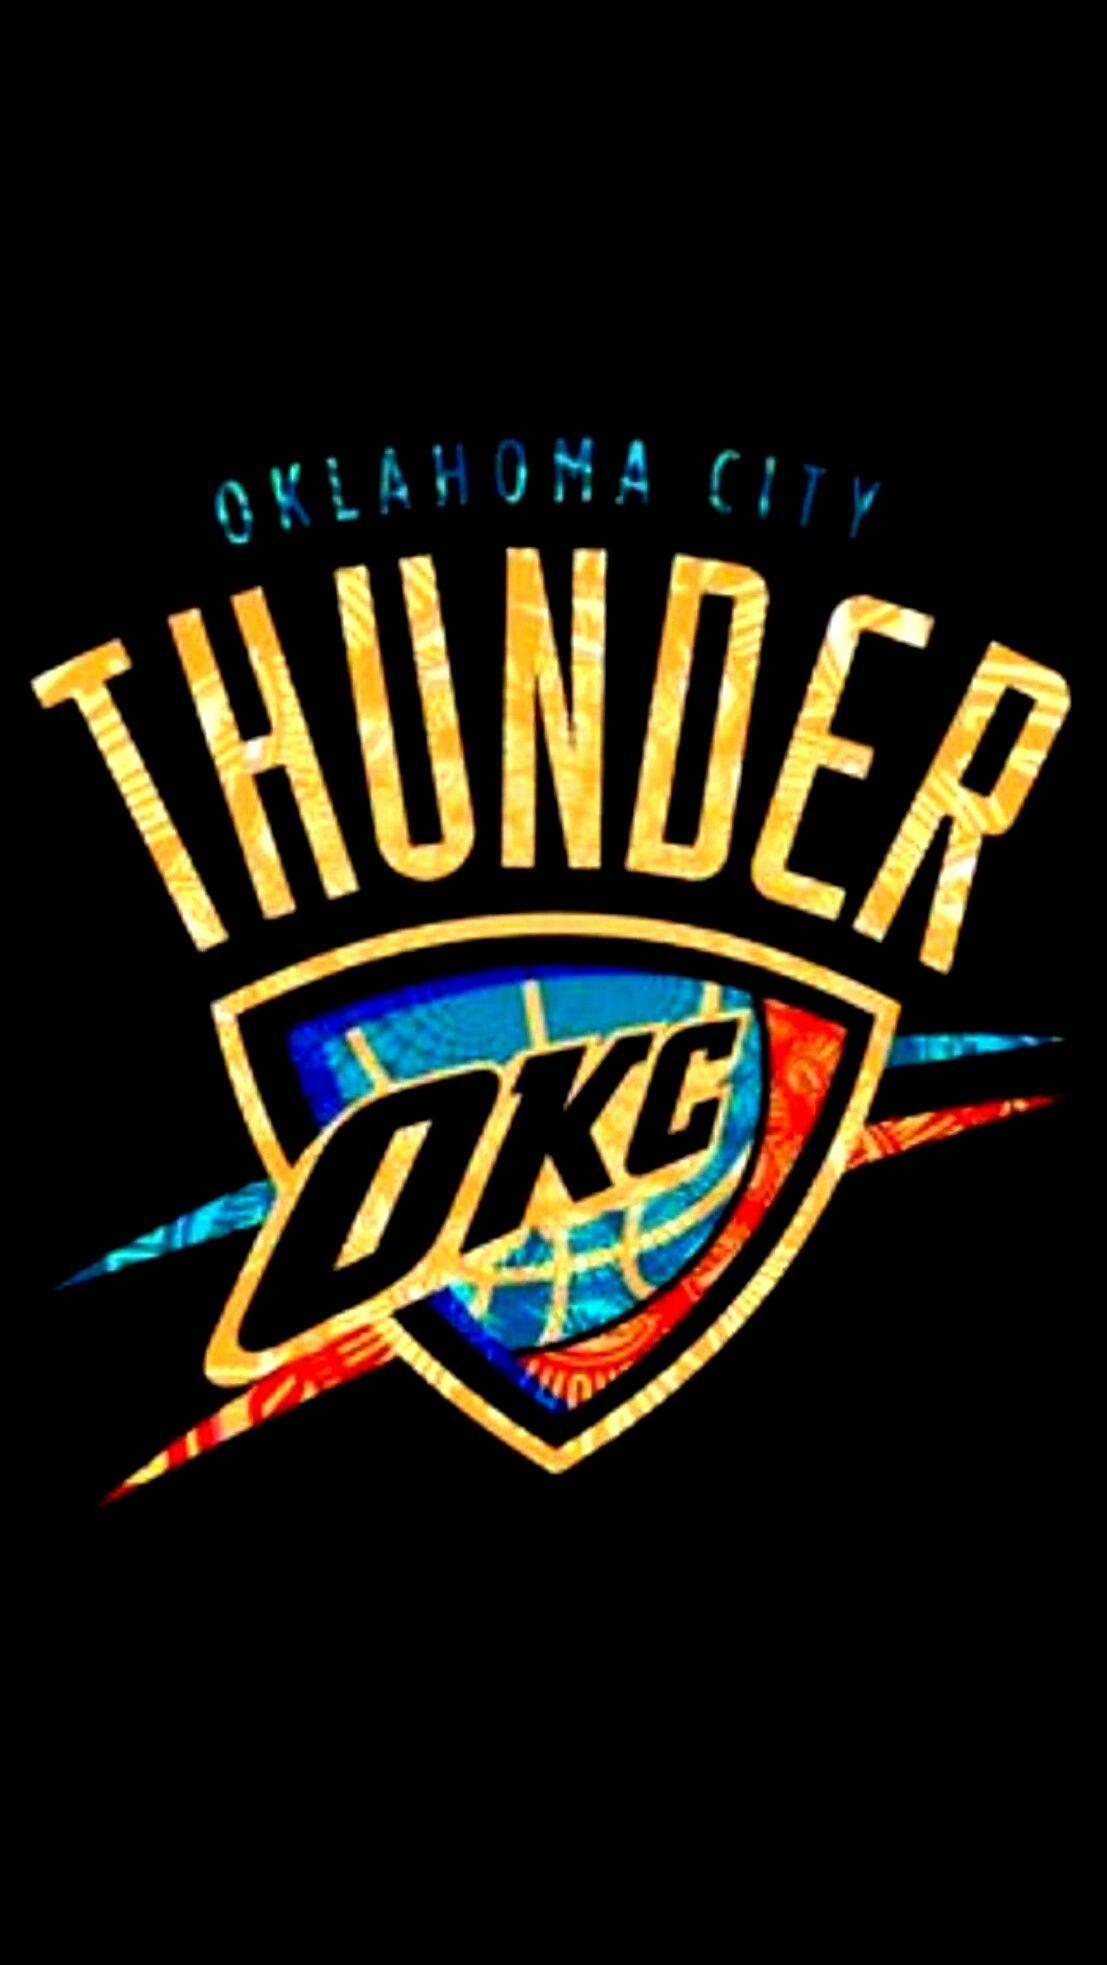 Oklahoma City Thunder Wallpaper HD 62 pictures